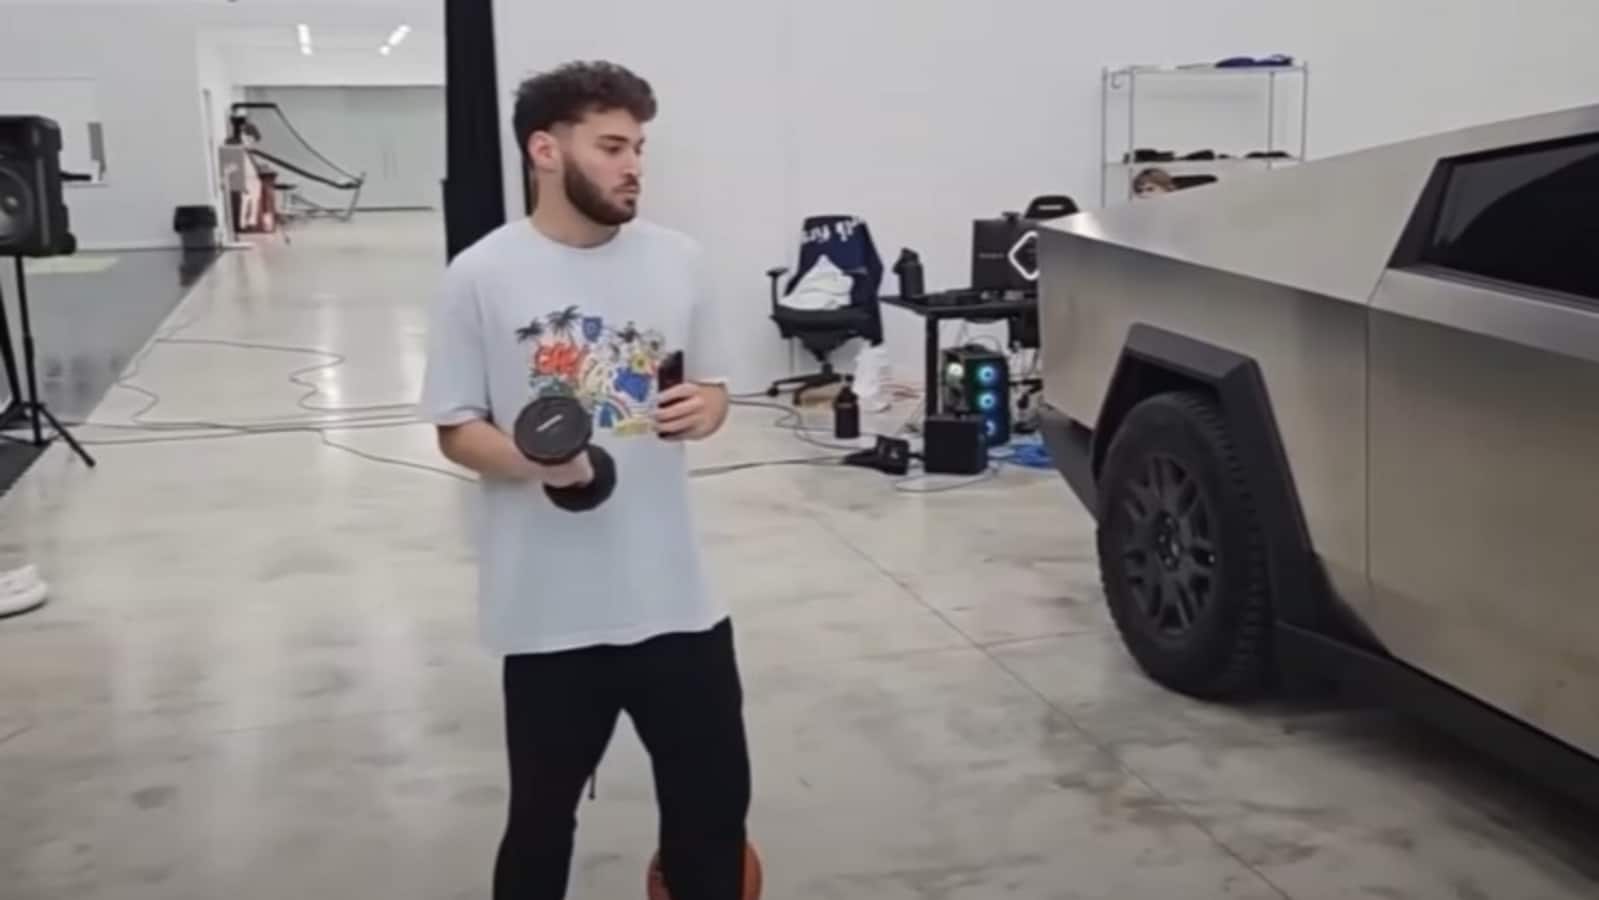 Adin Ross throws a dumbbell at his Tesla Cybertruck, here’s what happened next